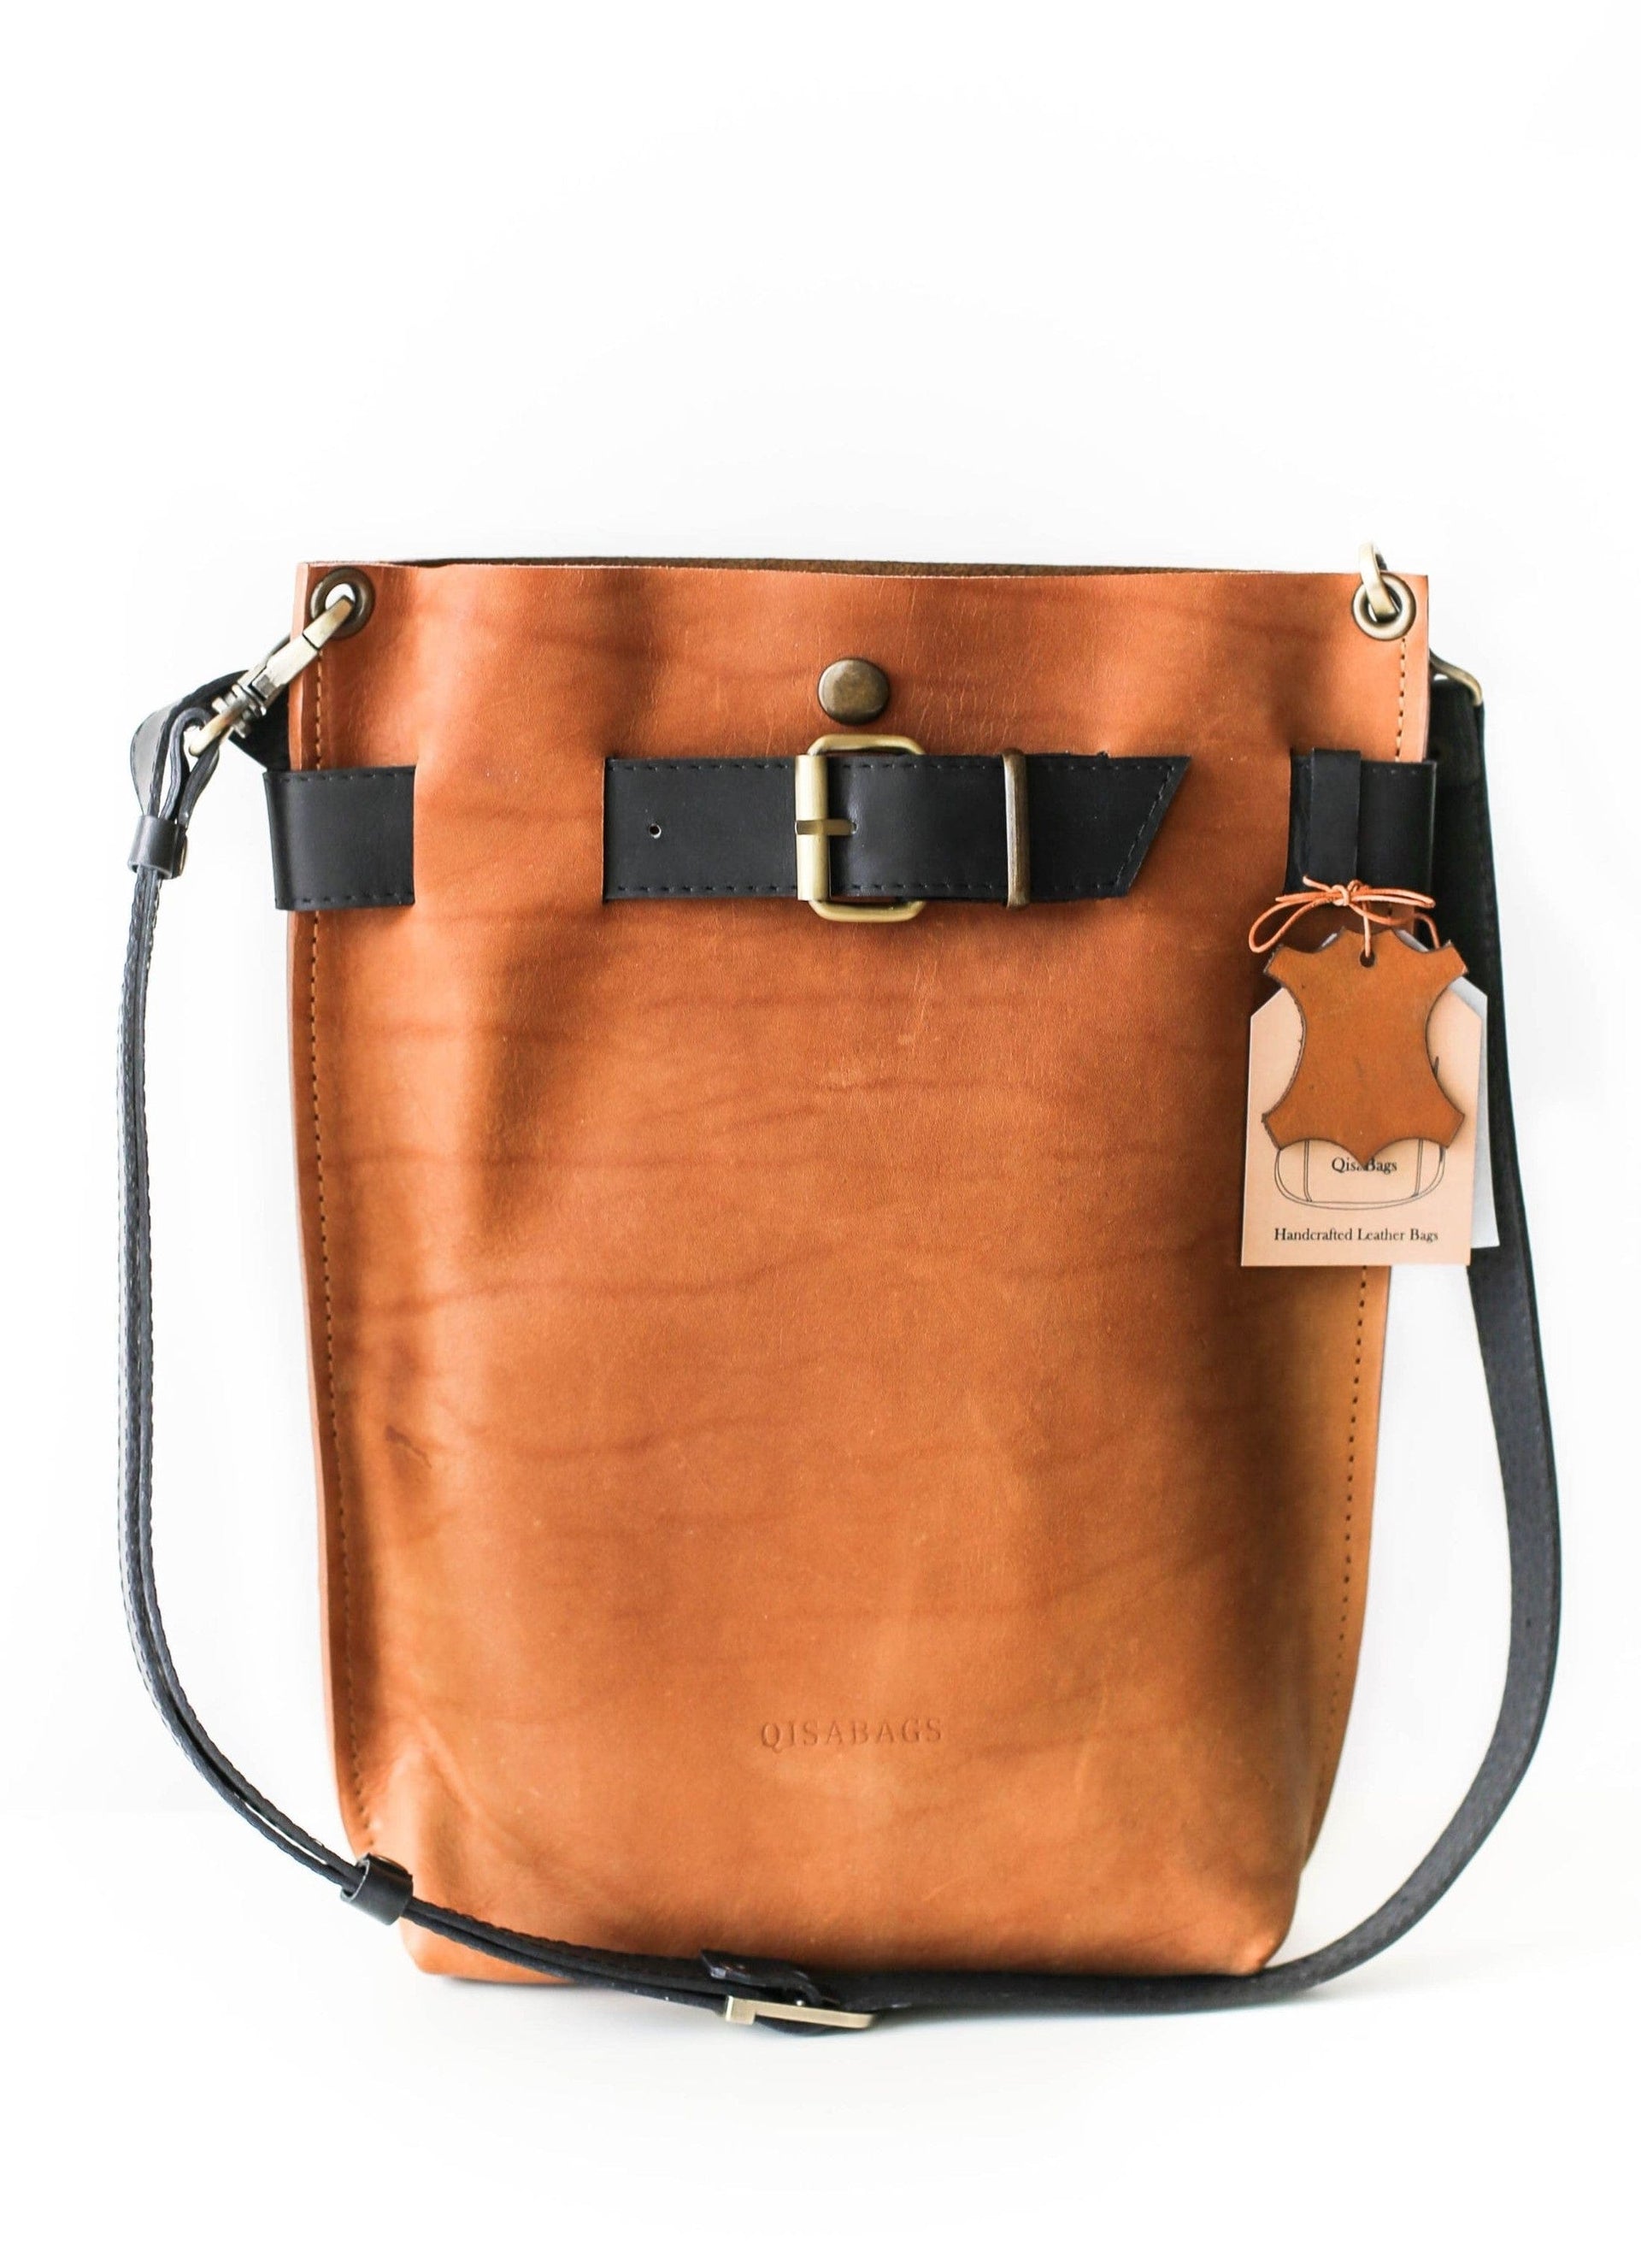 Brown with Black leather bag